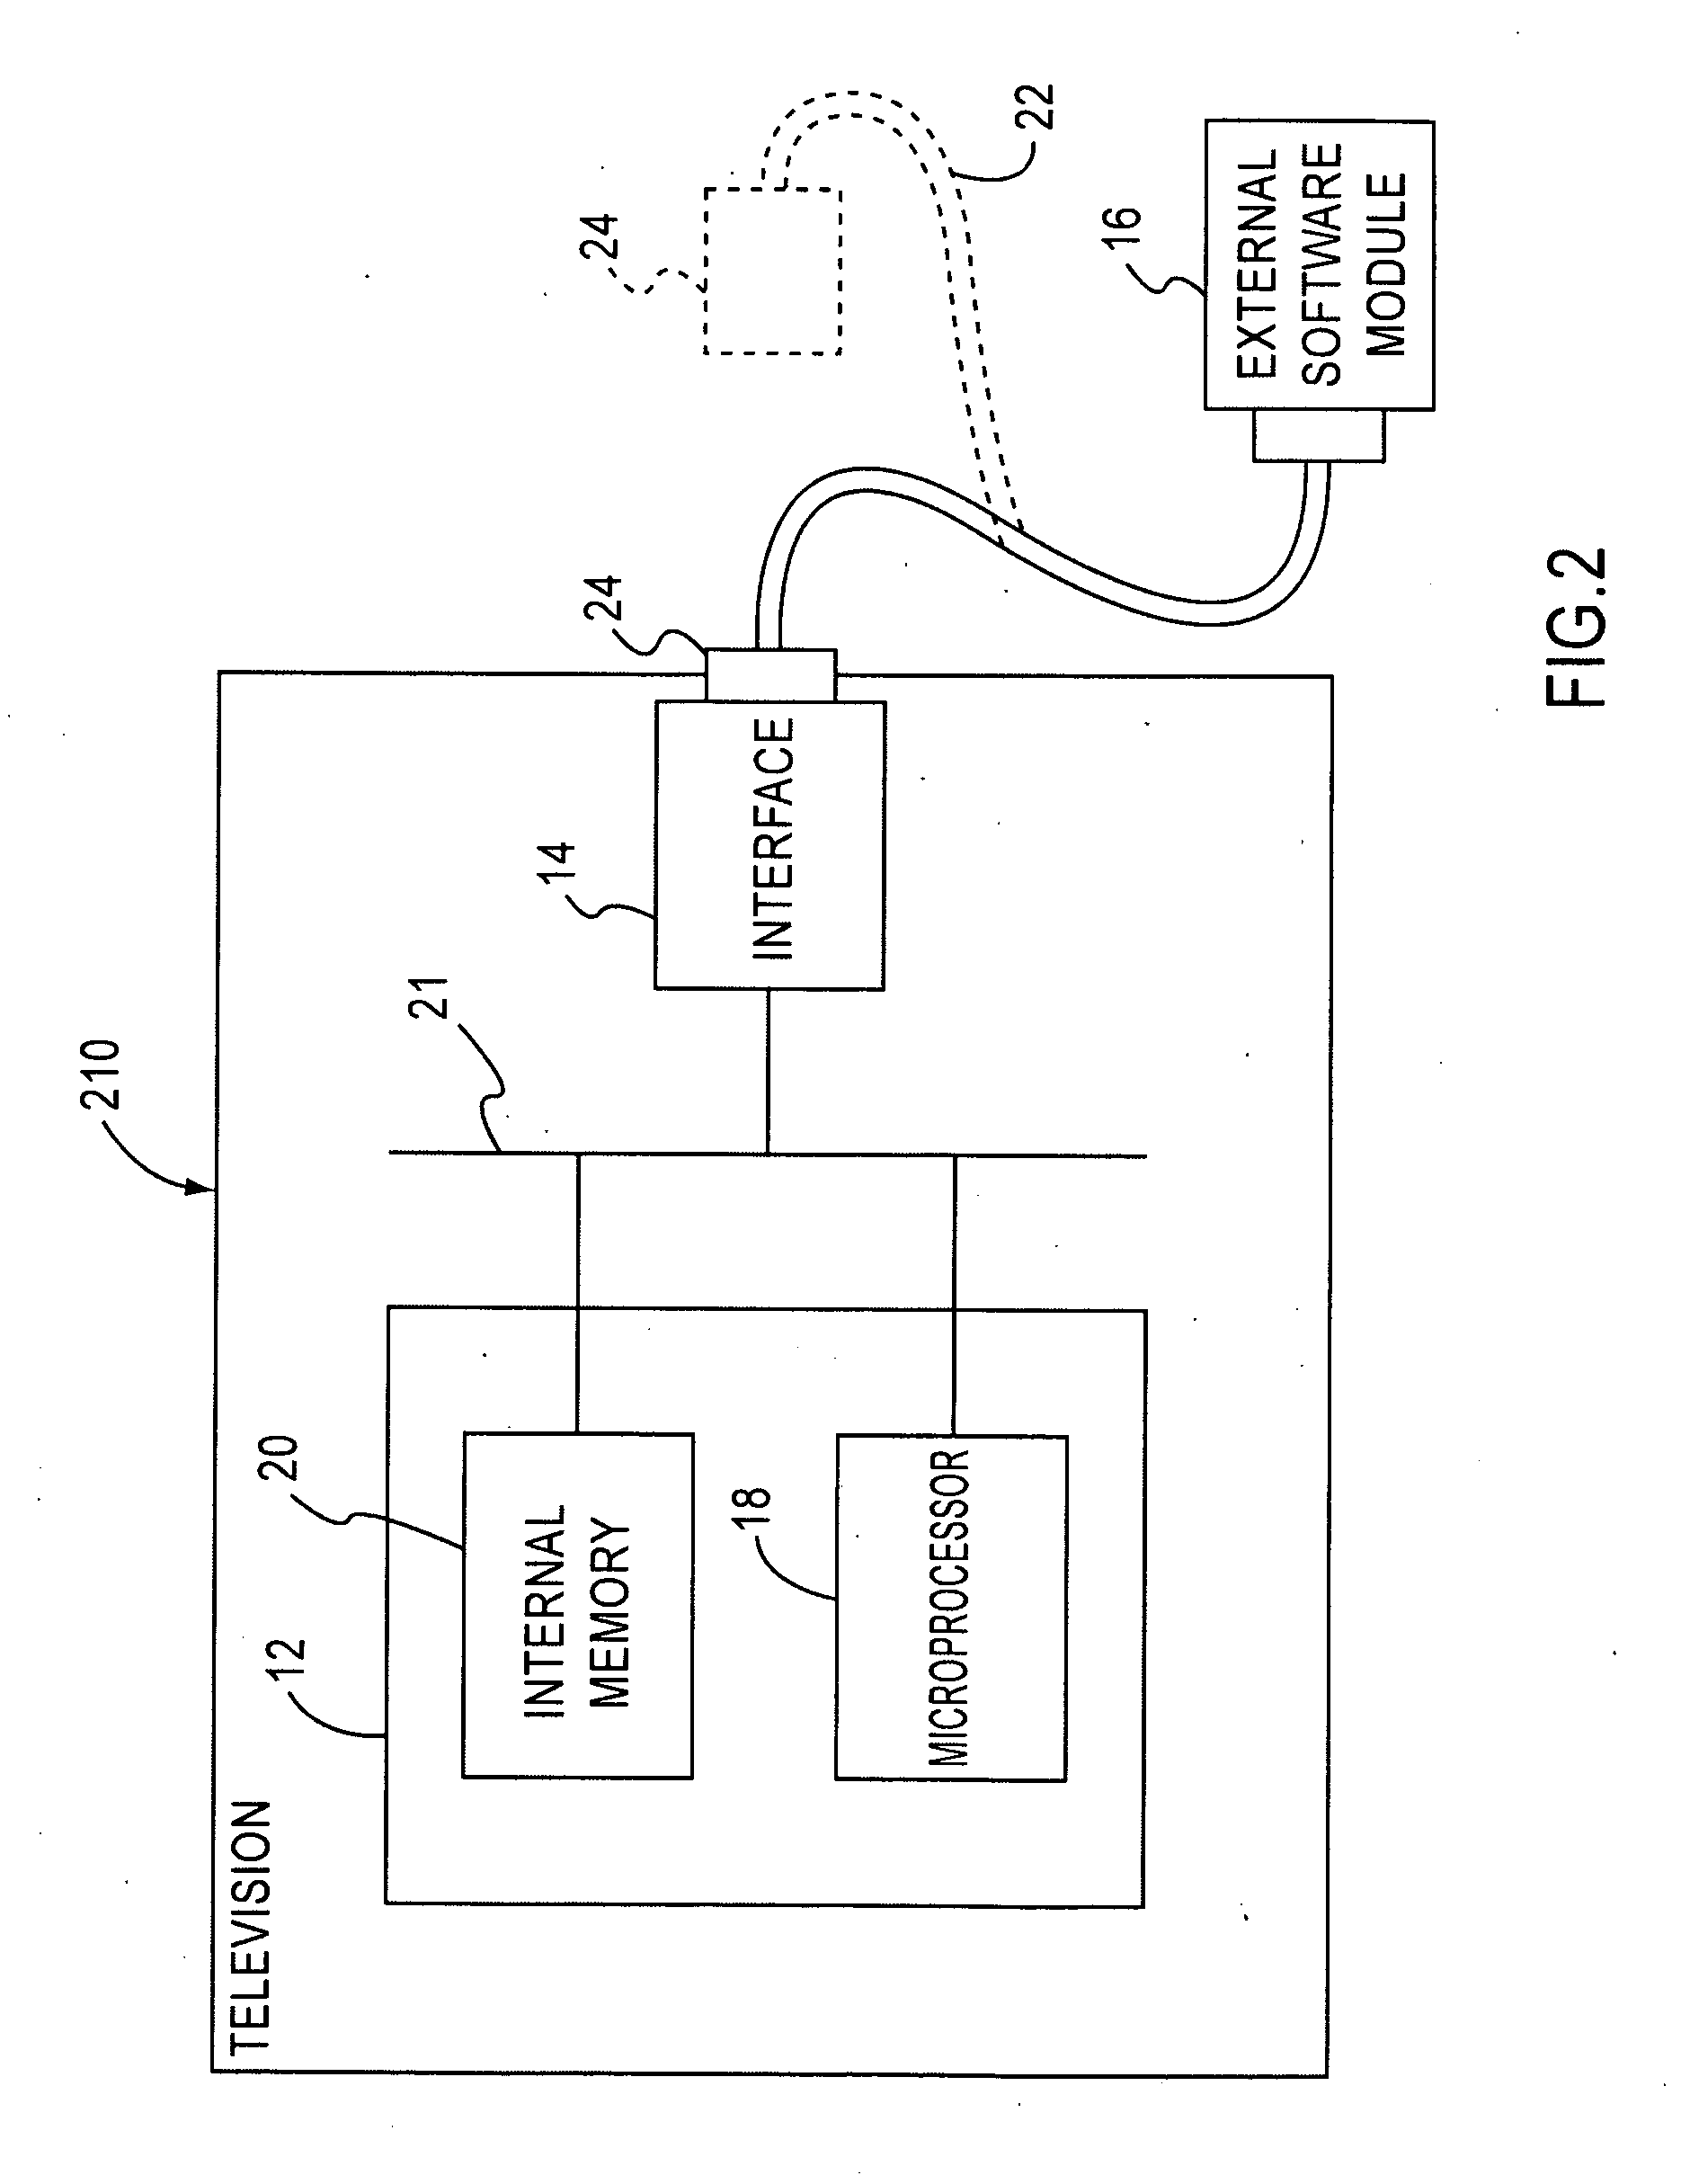 Bi-directional remote control unit and method of using the same